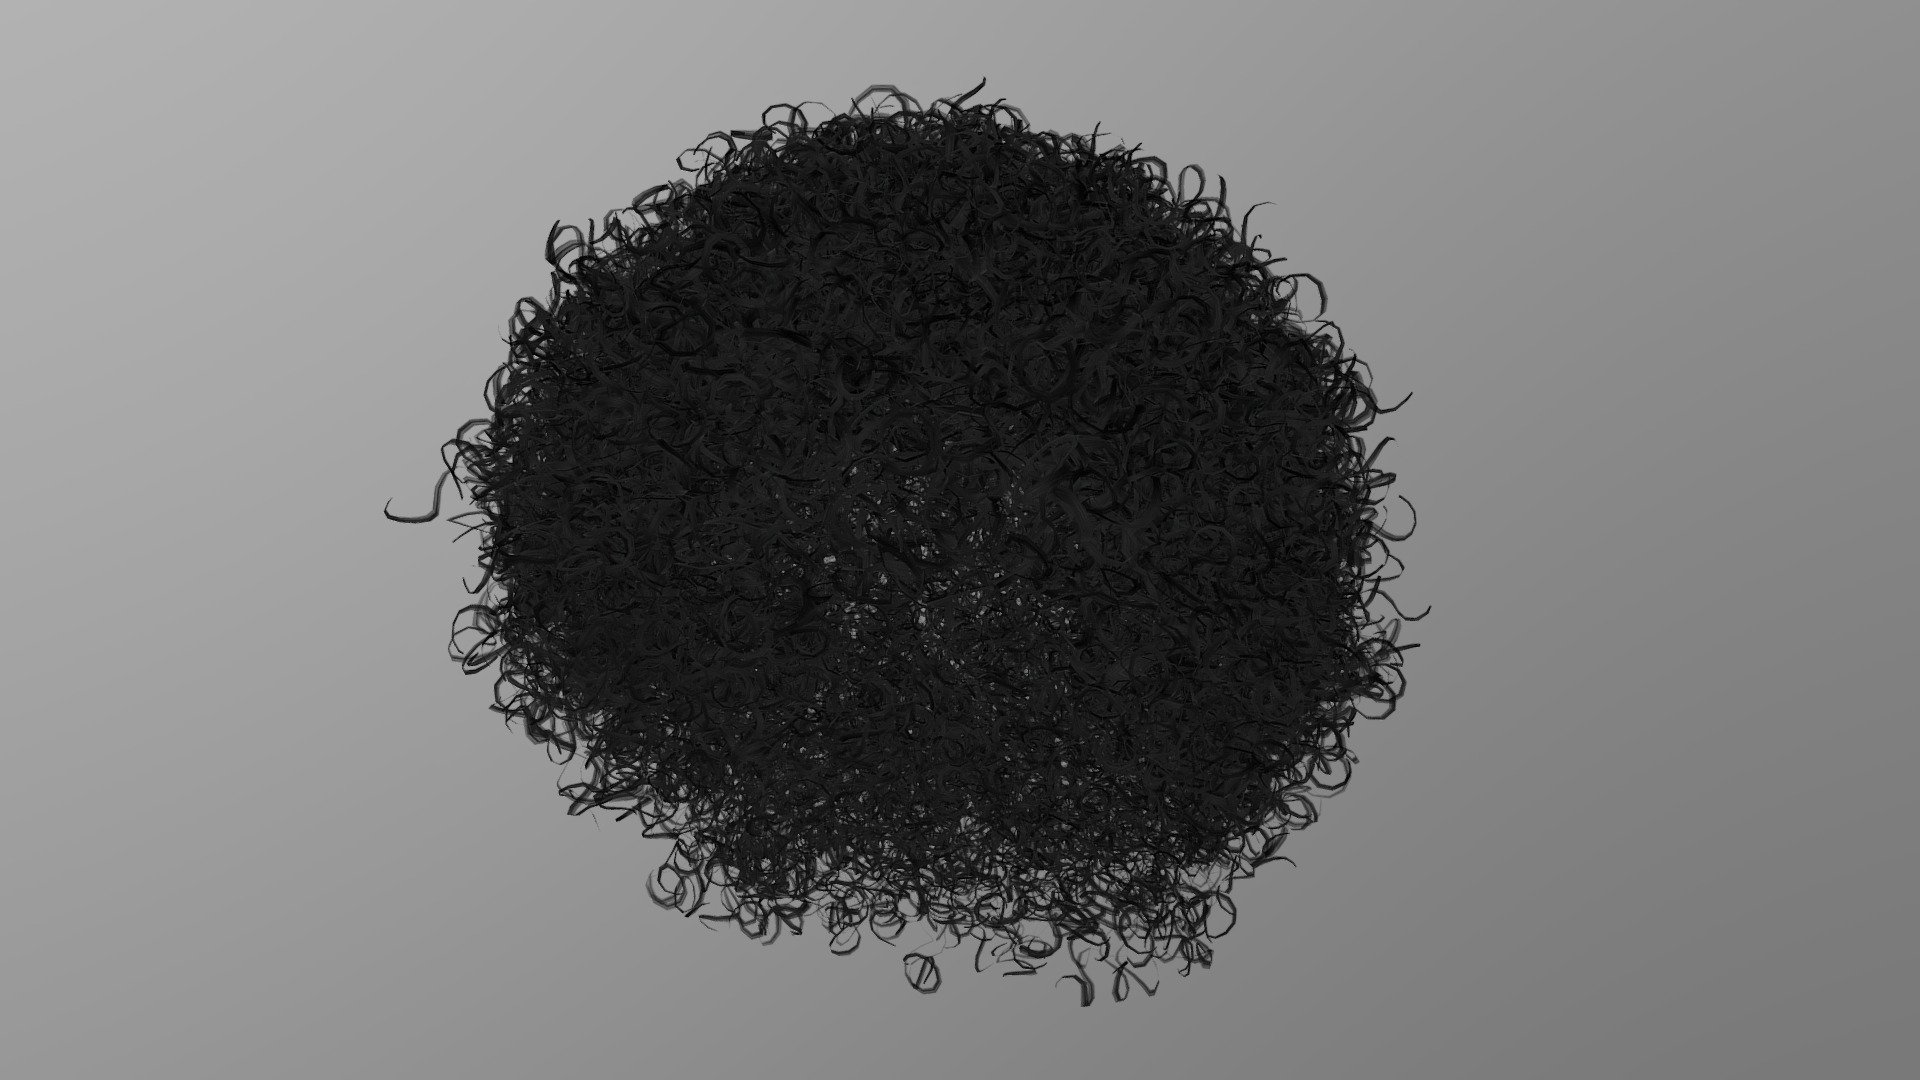 Curly Afro Hair (Black)
Bring your 3D model of a Curly Afro Hair to life with this high-poly design. Perfect for use in games, animations, VR, AR, and more, this model is optimized for performance and still retains a high level of detail.


Features



High poly design with 613,648 vertices

898,556 edges

295,866 faces (polygons)

591,732 tris

2k PBR Textures and materials

File formats included: .obj, .fbx, .dae


Tools Used
This Curly Afro Hair 3D model was created using Blender 3.3.1, a popular and versatile 3D creation software.


Availability
This high-poly Curly Afro Hair 3D model is ready for use and available for purchase. Bring your project to the next level with this high-quality and optimized model 3d model